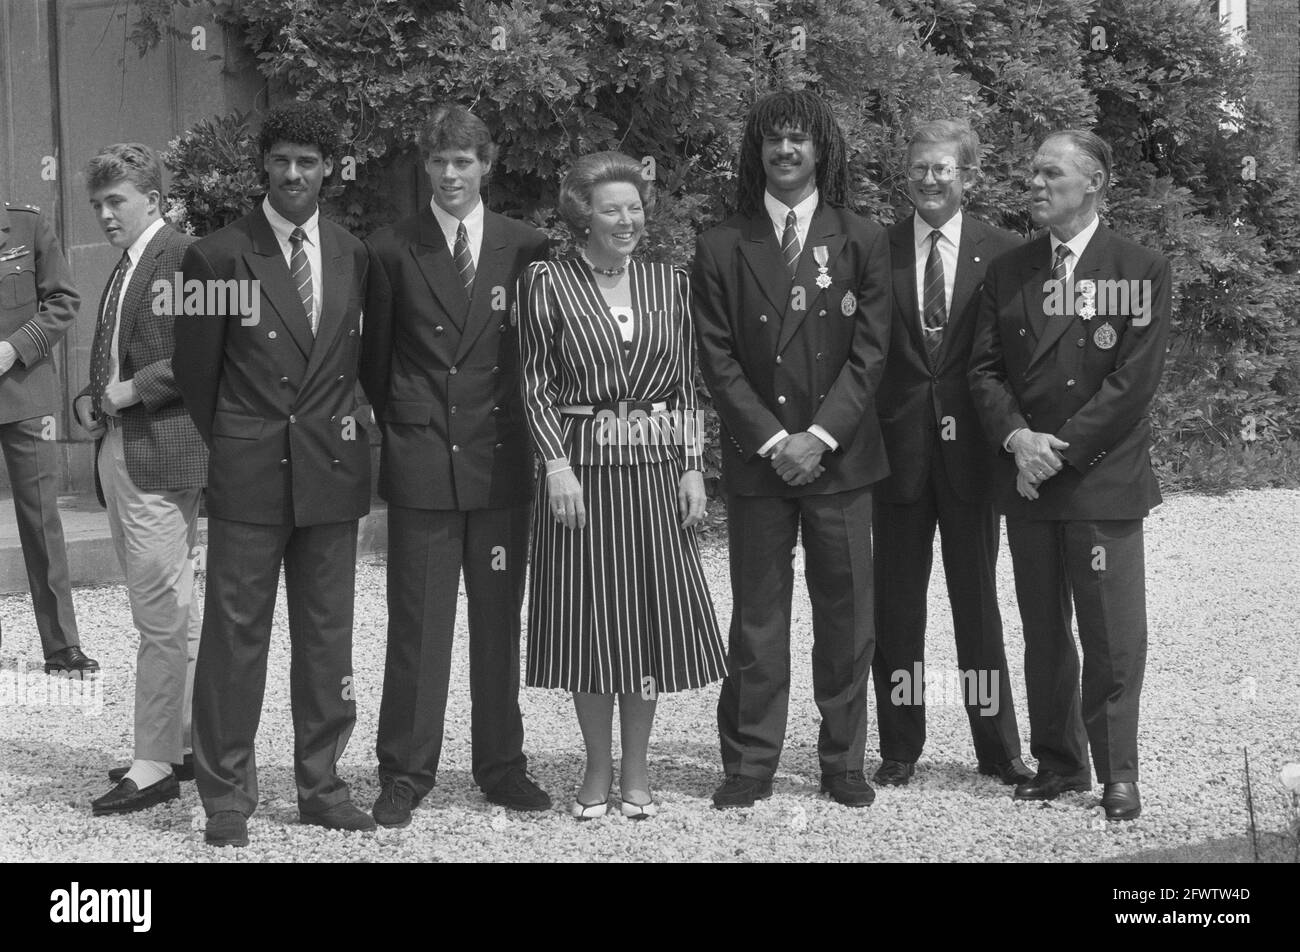 Reception of the Dutch National Football Team at Palace Huis ten Bosch after 1988; in the garden of the Palace, June 27, 1988, Sport, Football, The Netherlands, 20th century press agency photo, news to remember, documentary, historic photography 1945-1990, visual stories, human history of the Twentieth Century, capturing moments in time Stock Photo